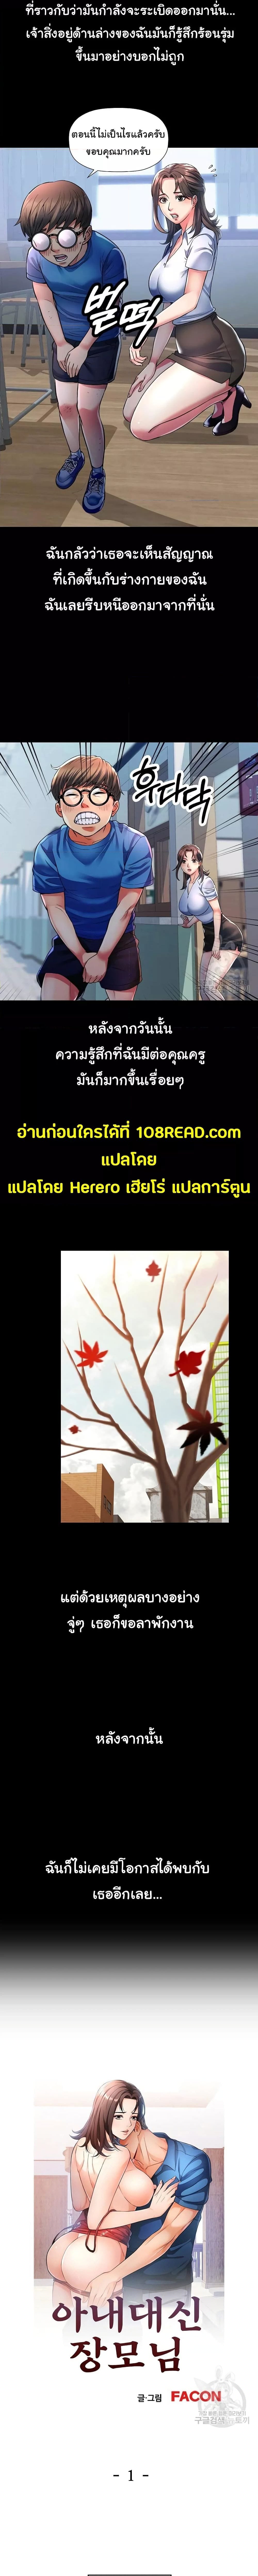 In Her Place ตอนที่ 1 ภาพ 3